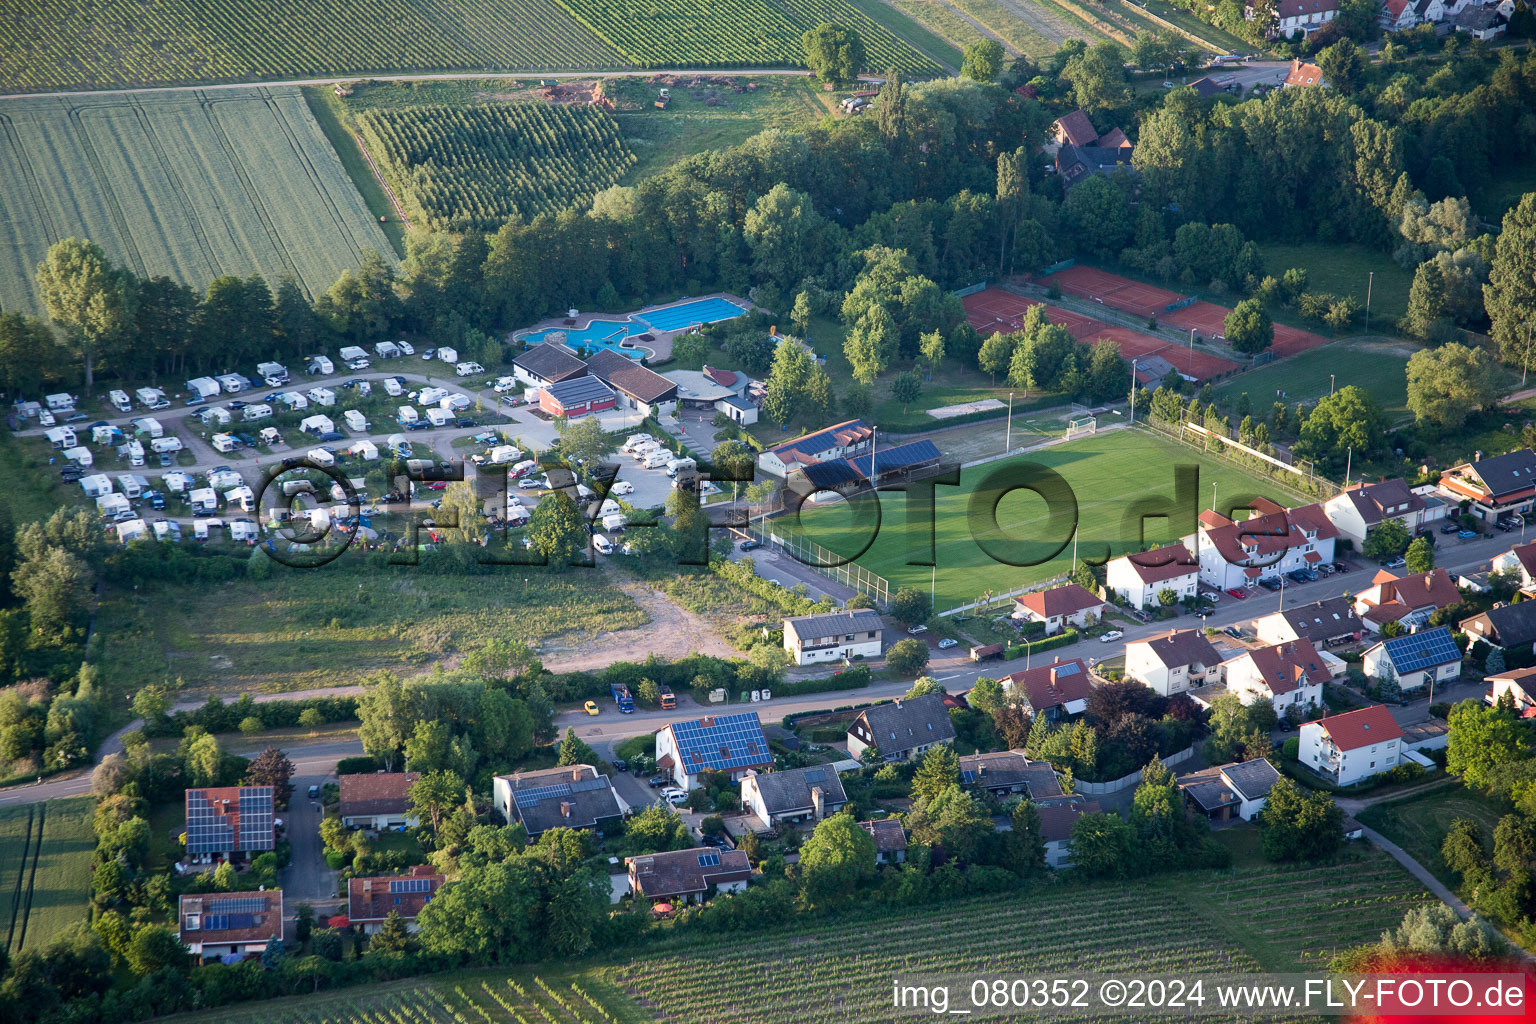 Camping in the Klingbachtal in the district Klingen in Heuchelheim-Klingen in the state Rhineland-Palatinate, Germany seen from above